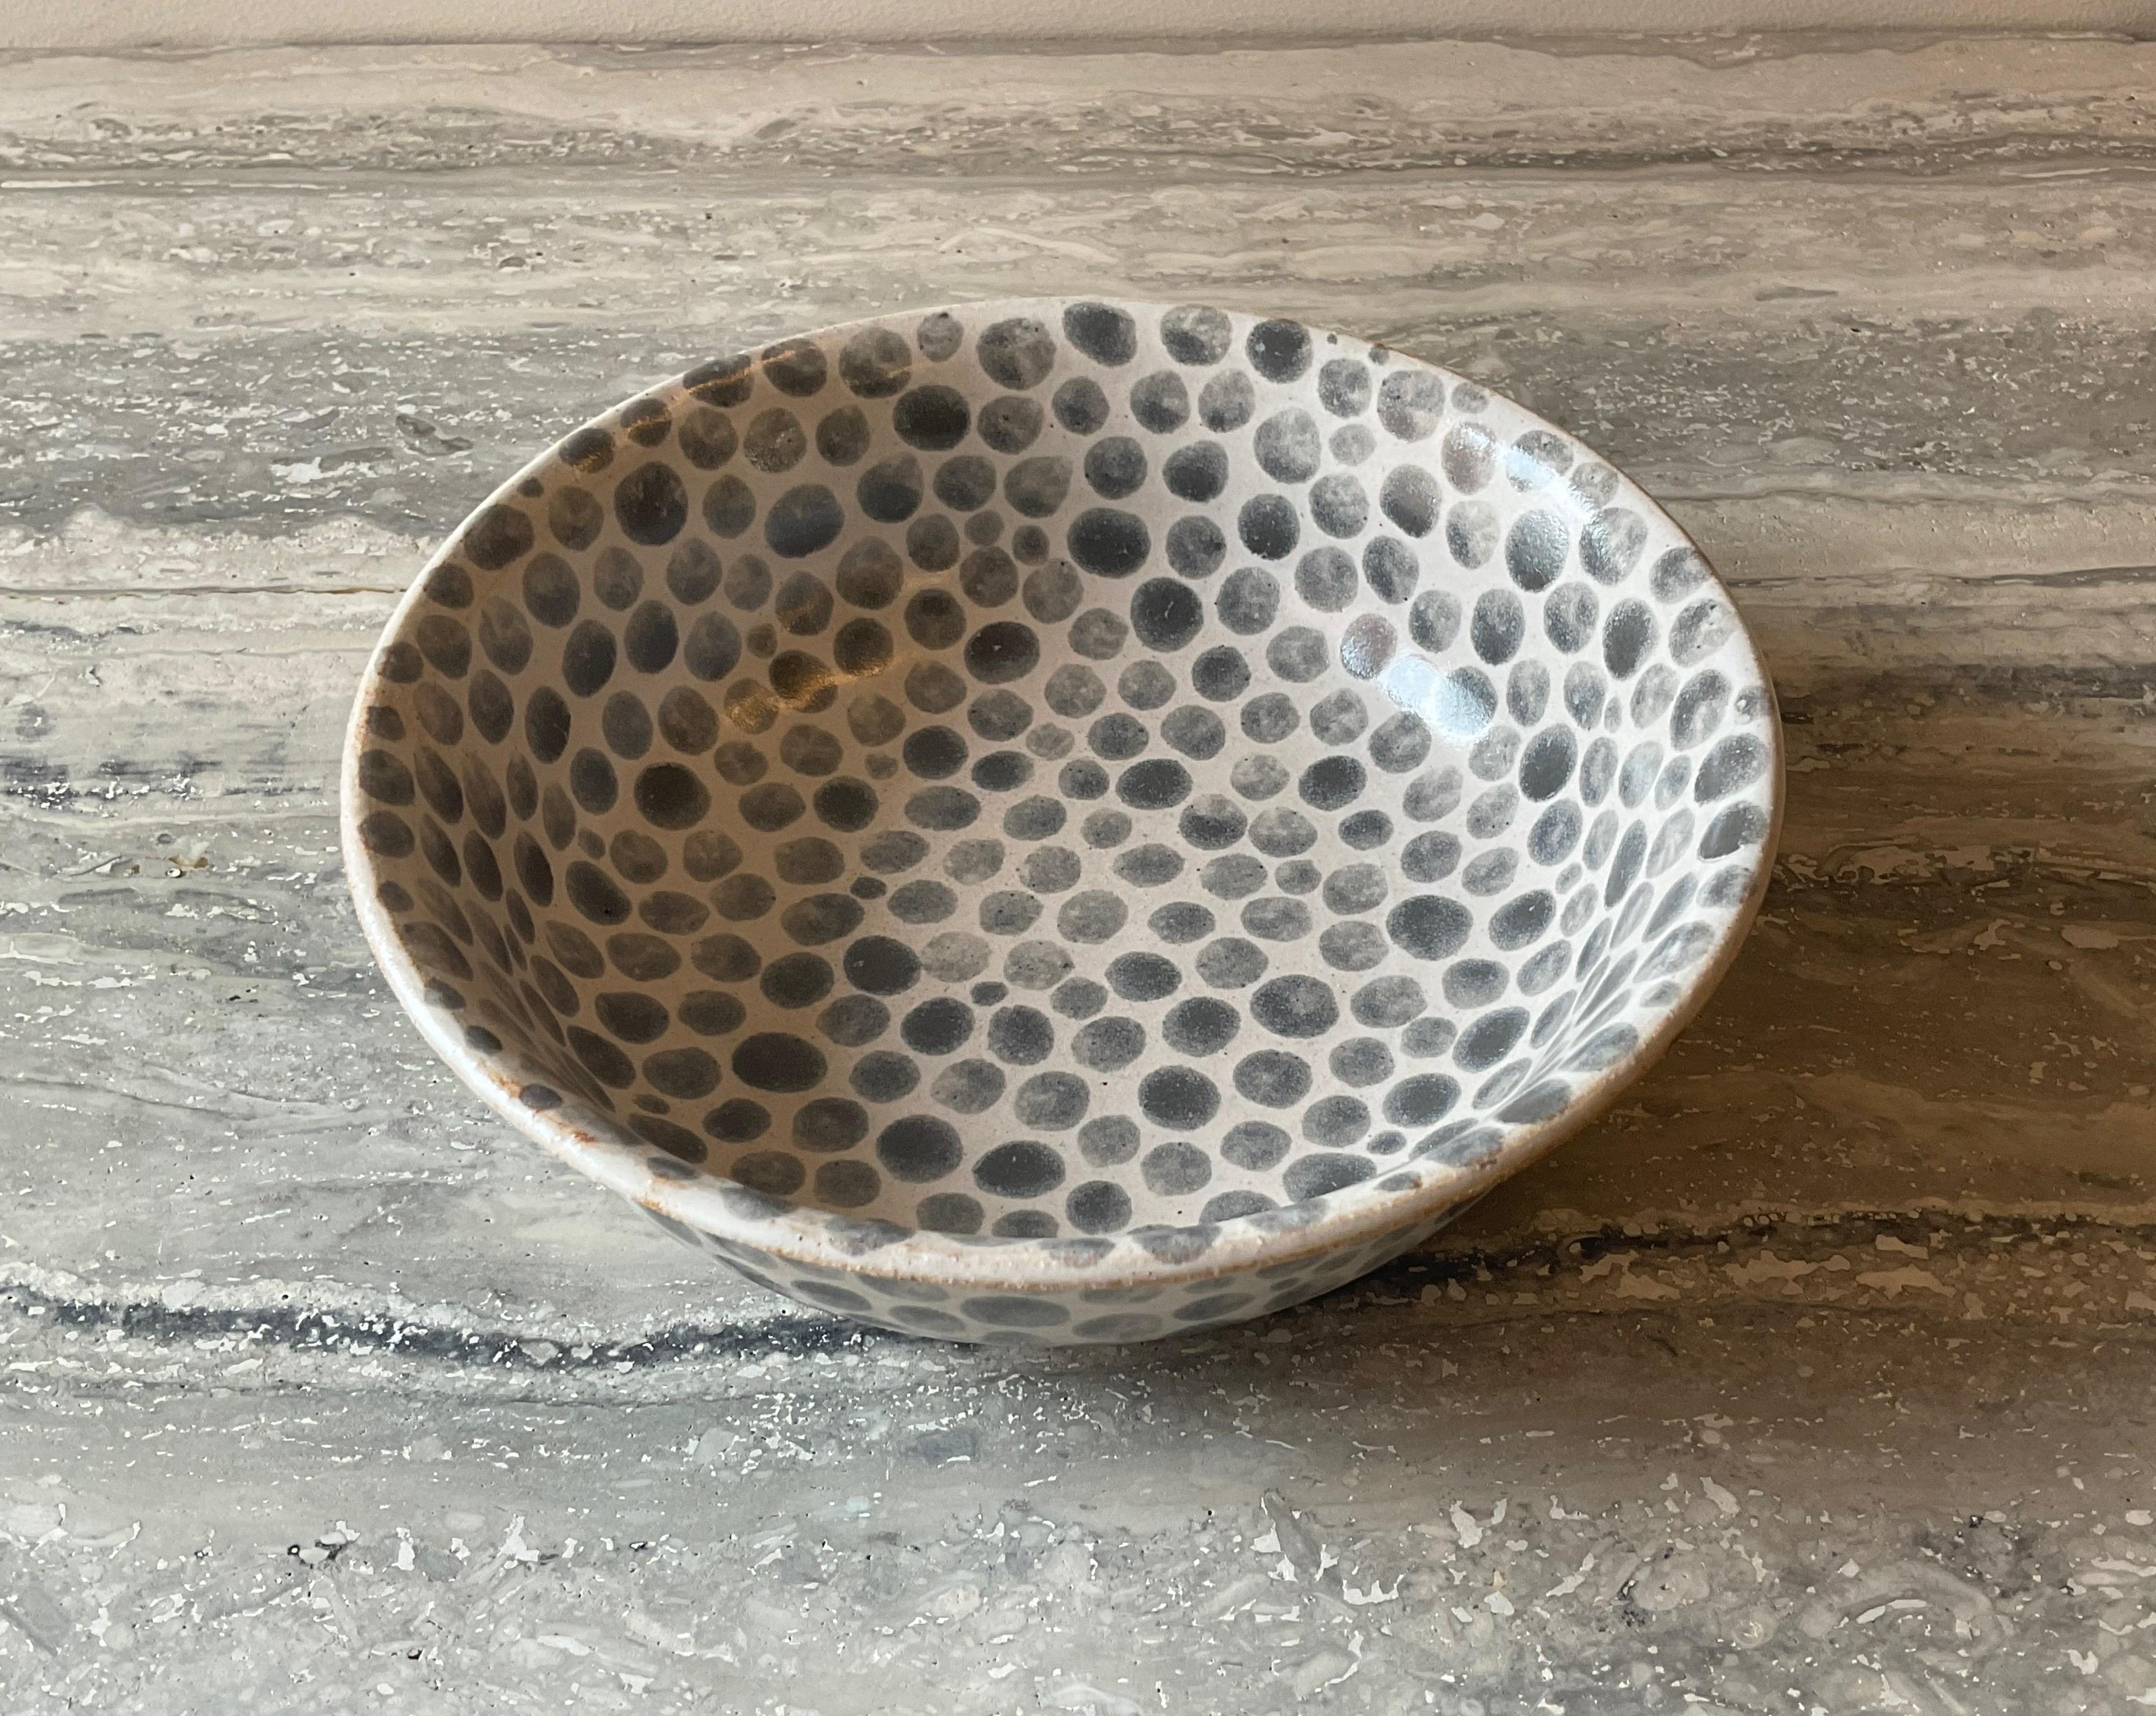 Soup bowl with curved mouth. Hand painted grey dots on white glazed stoneware. Thrown on a wheel. Made by hand in Tribeca NYC.